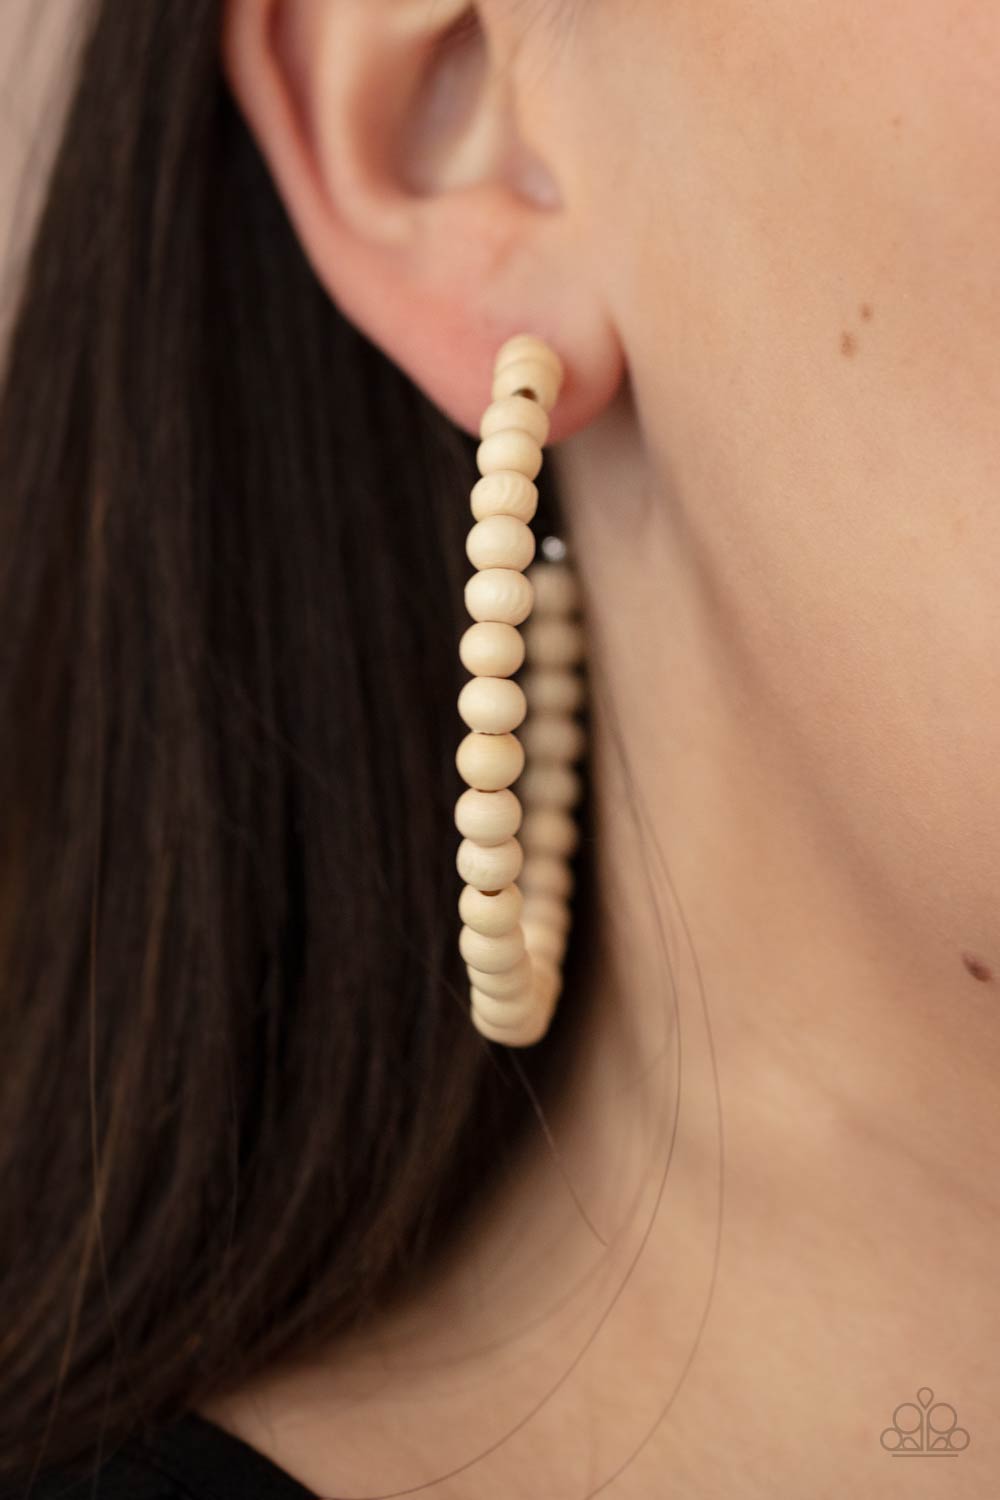 Should Have, Could Have, WOOD Have White Hoop Earring - Paparazzi Accessories  White wooden beads are threaded along a dainty wire, creating an earthy hoop. Earring attaches to a standard post fitting. Hoop measures approximately 2 1/2" in diameter.  Sold as one pair of hoop earrings.